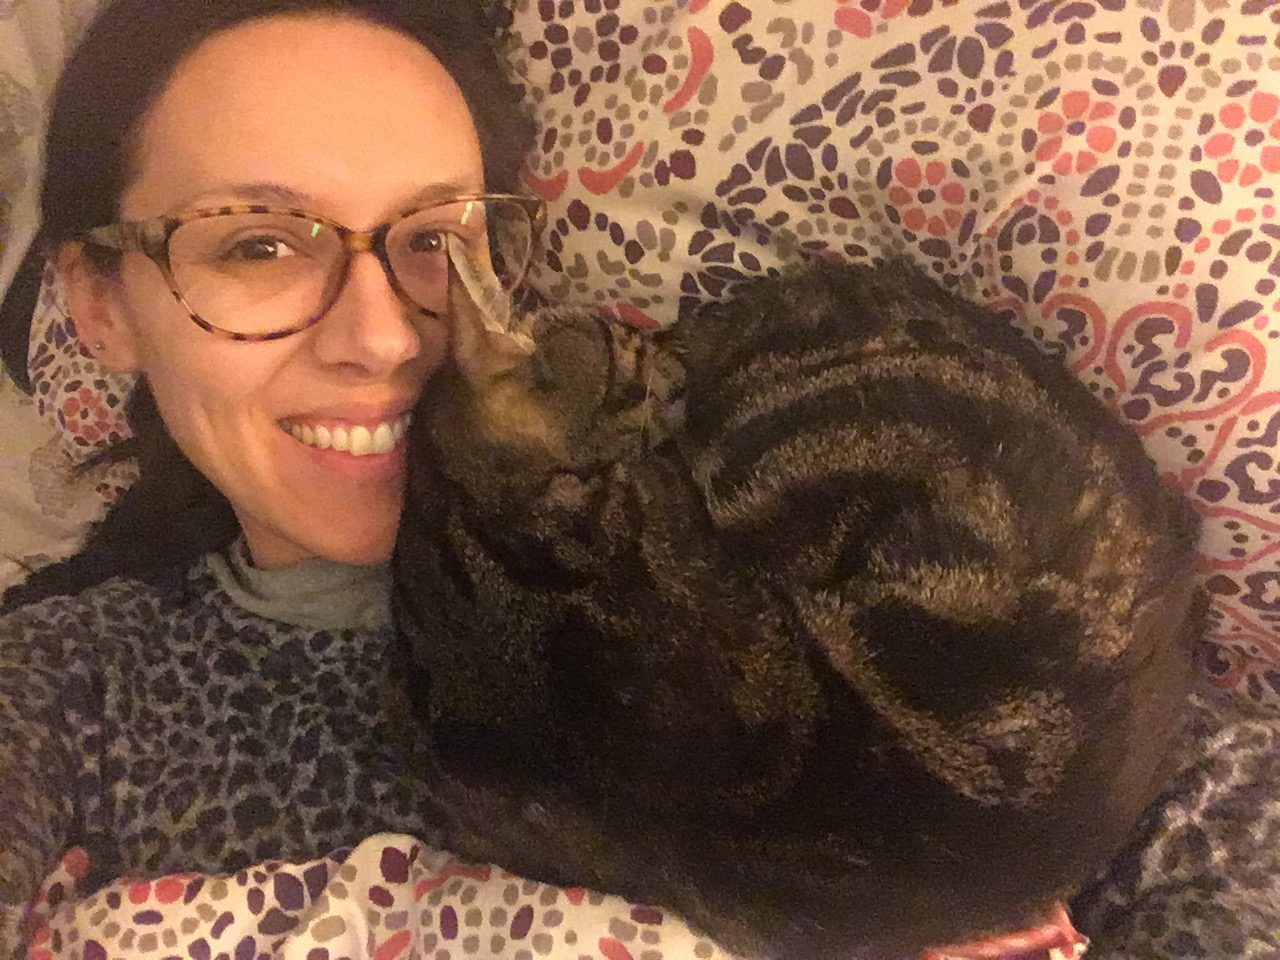 ditch the 9-5 depression and cuddle with your cat